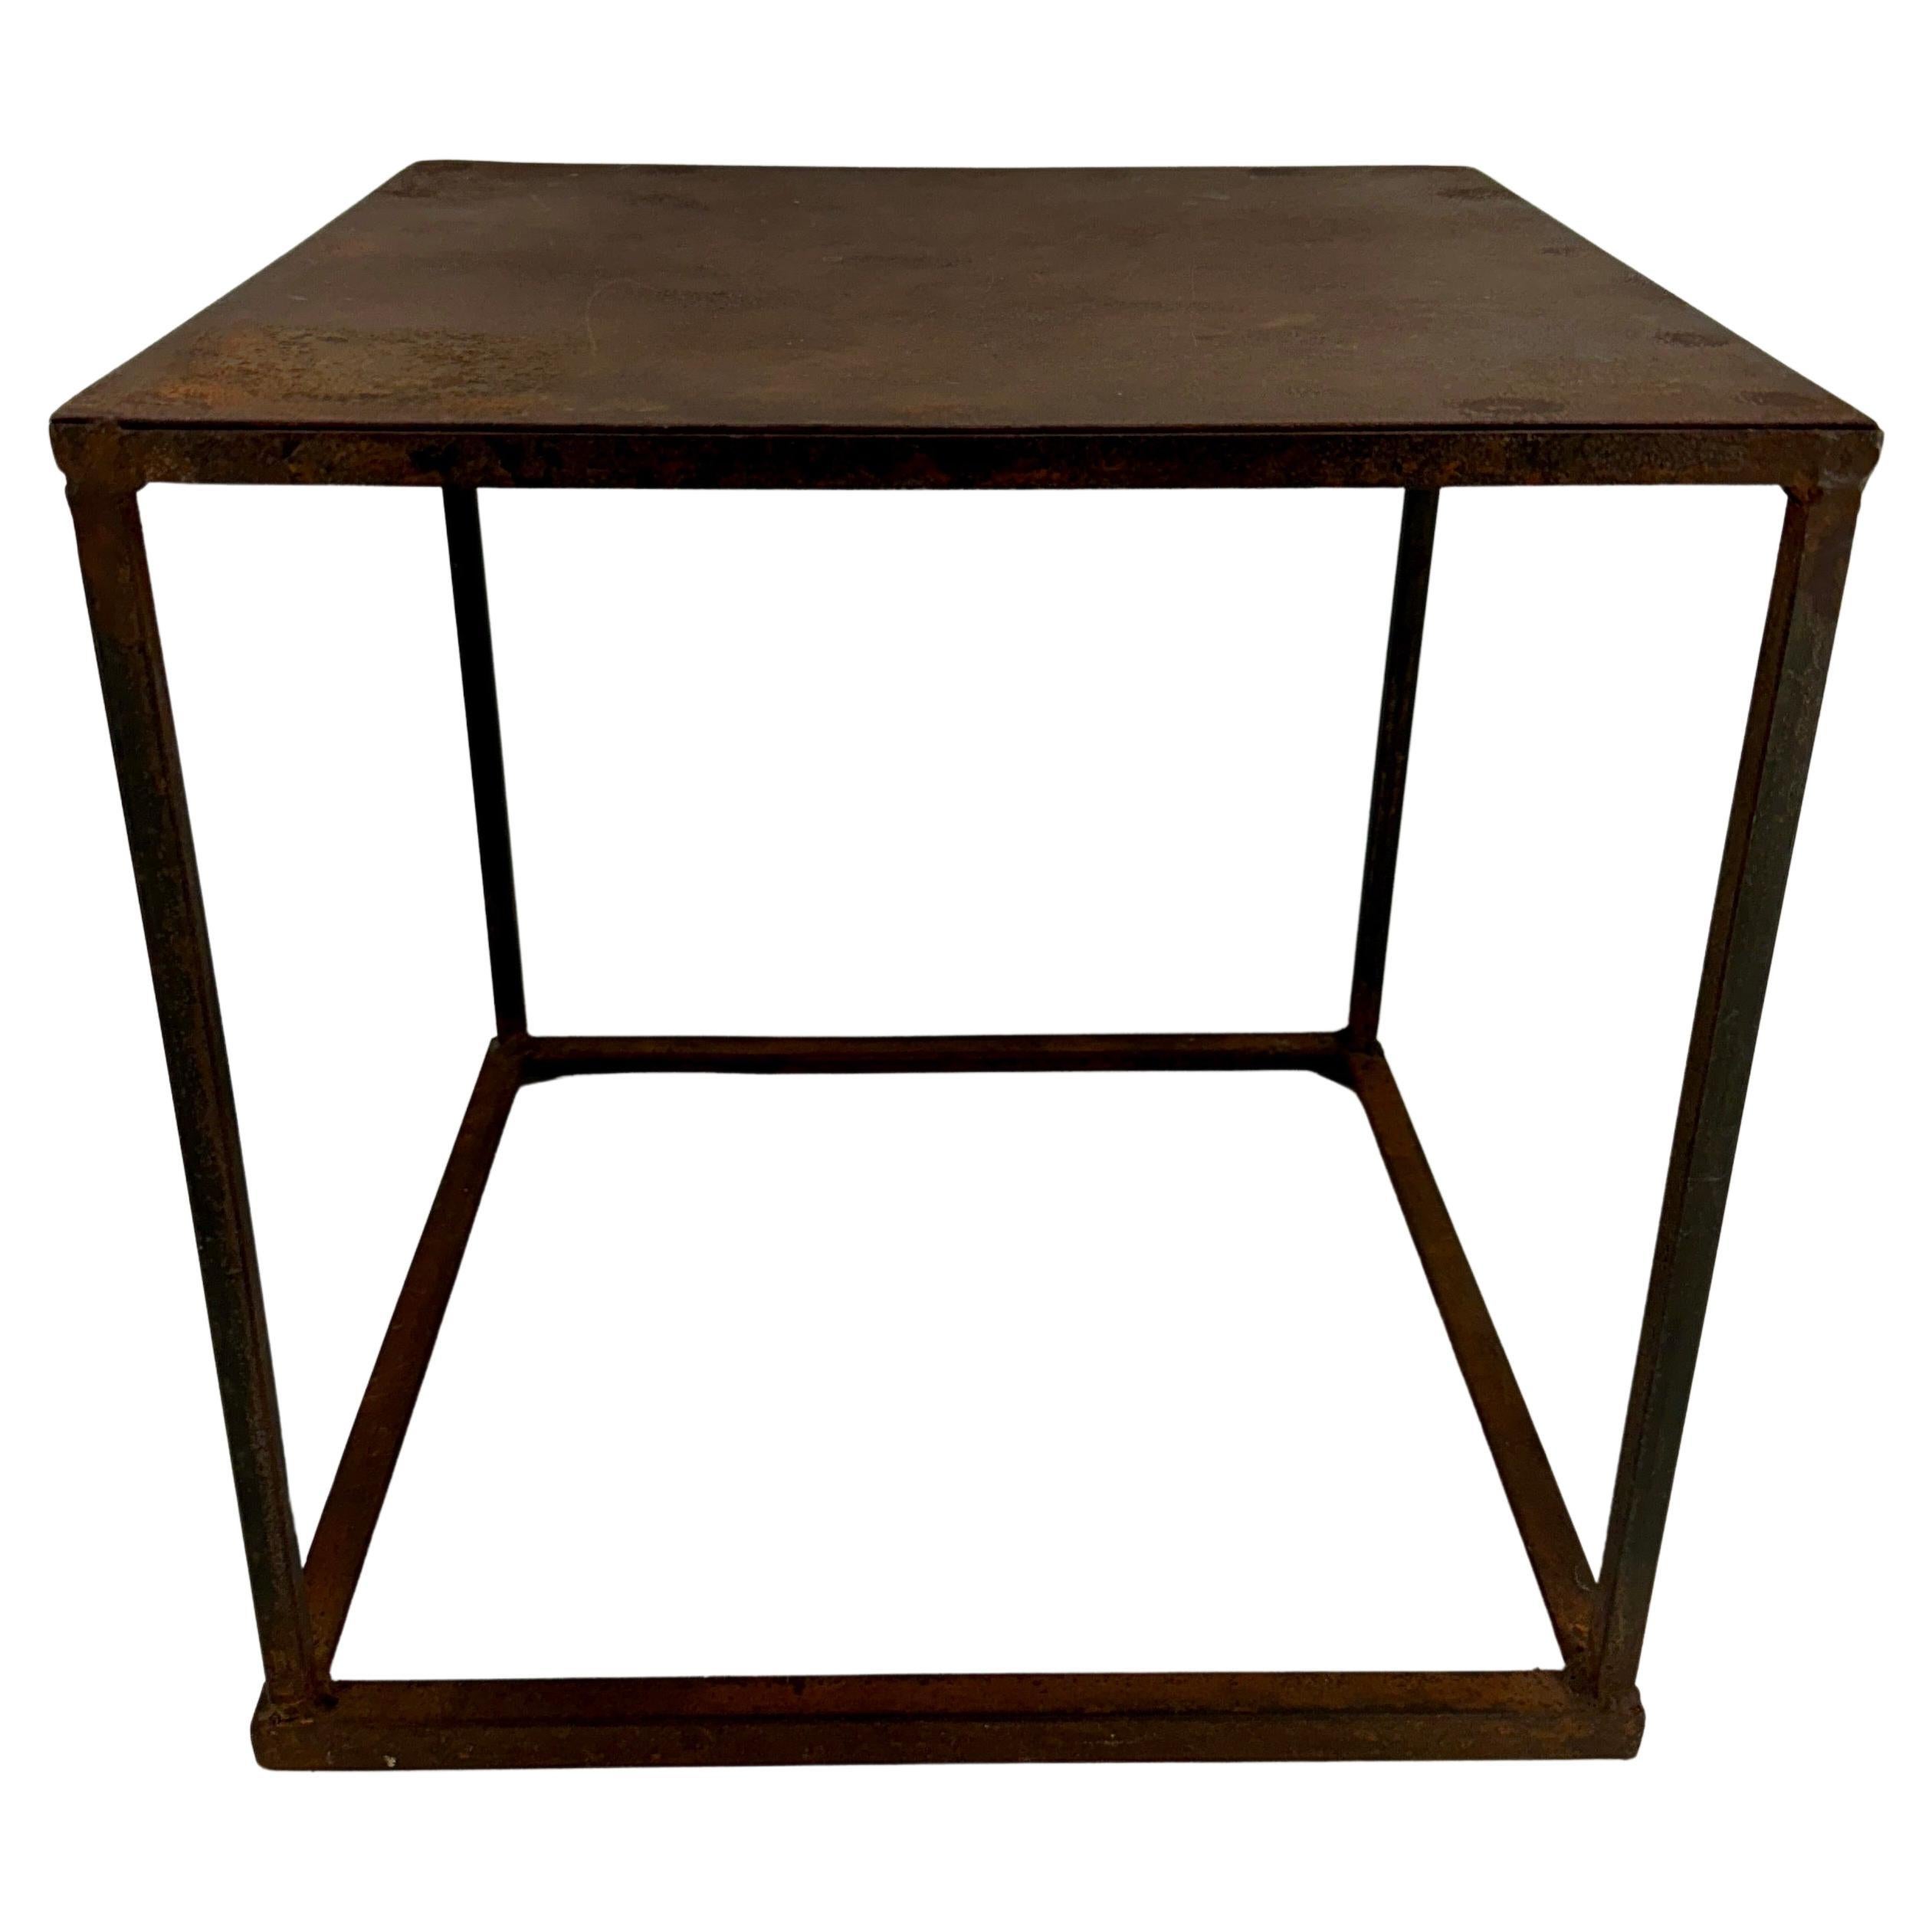 1960's Industrial Square Cube Iron Side Table

Very versatile iron side table for indoor or outdoor use. This vintage piece would add character next to a sofa or certainly a stand alone piece in any formal or informal setting. 